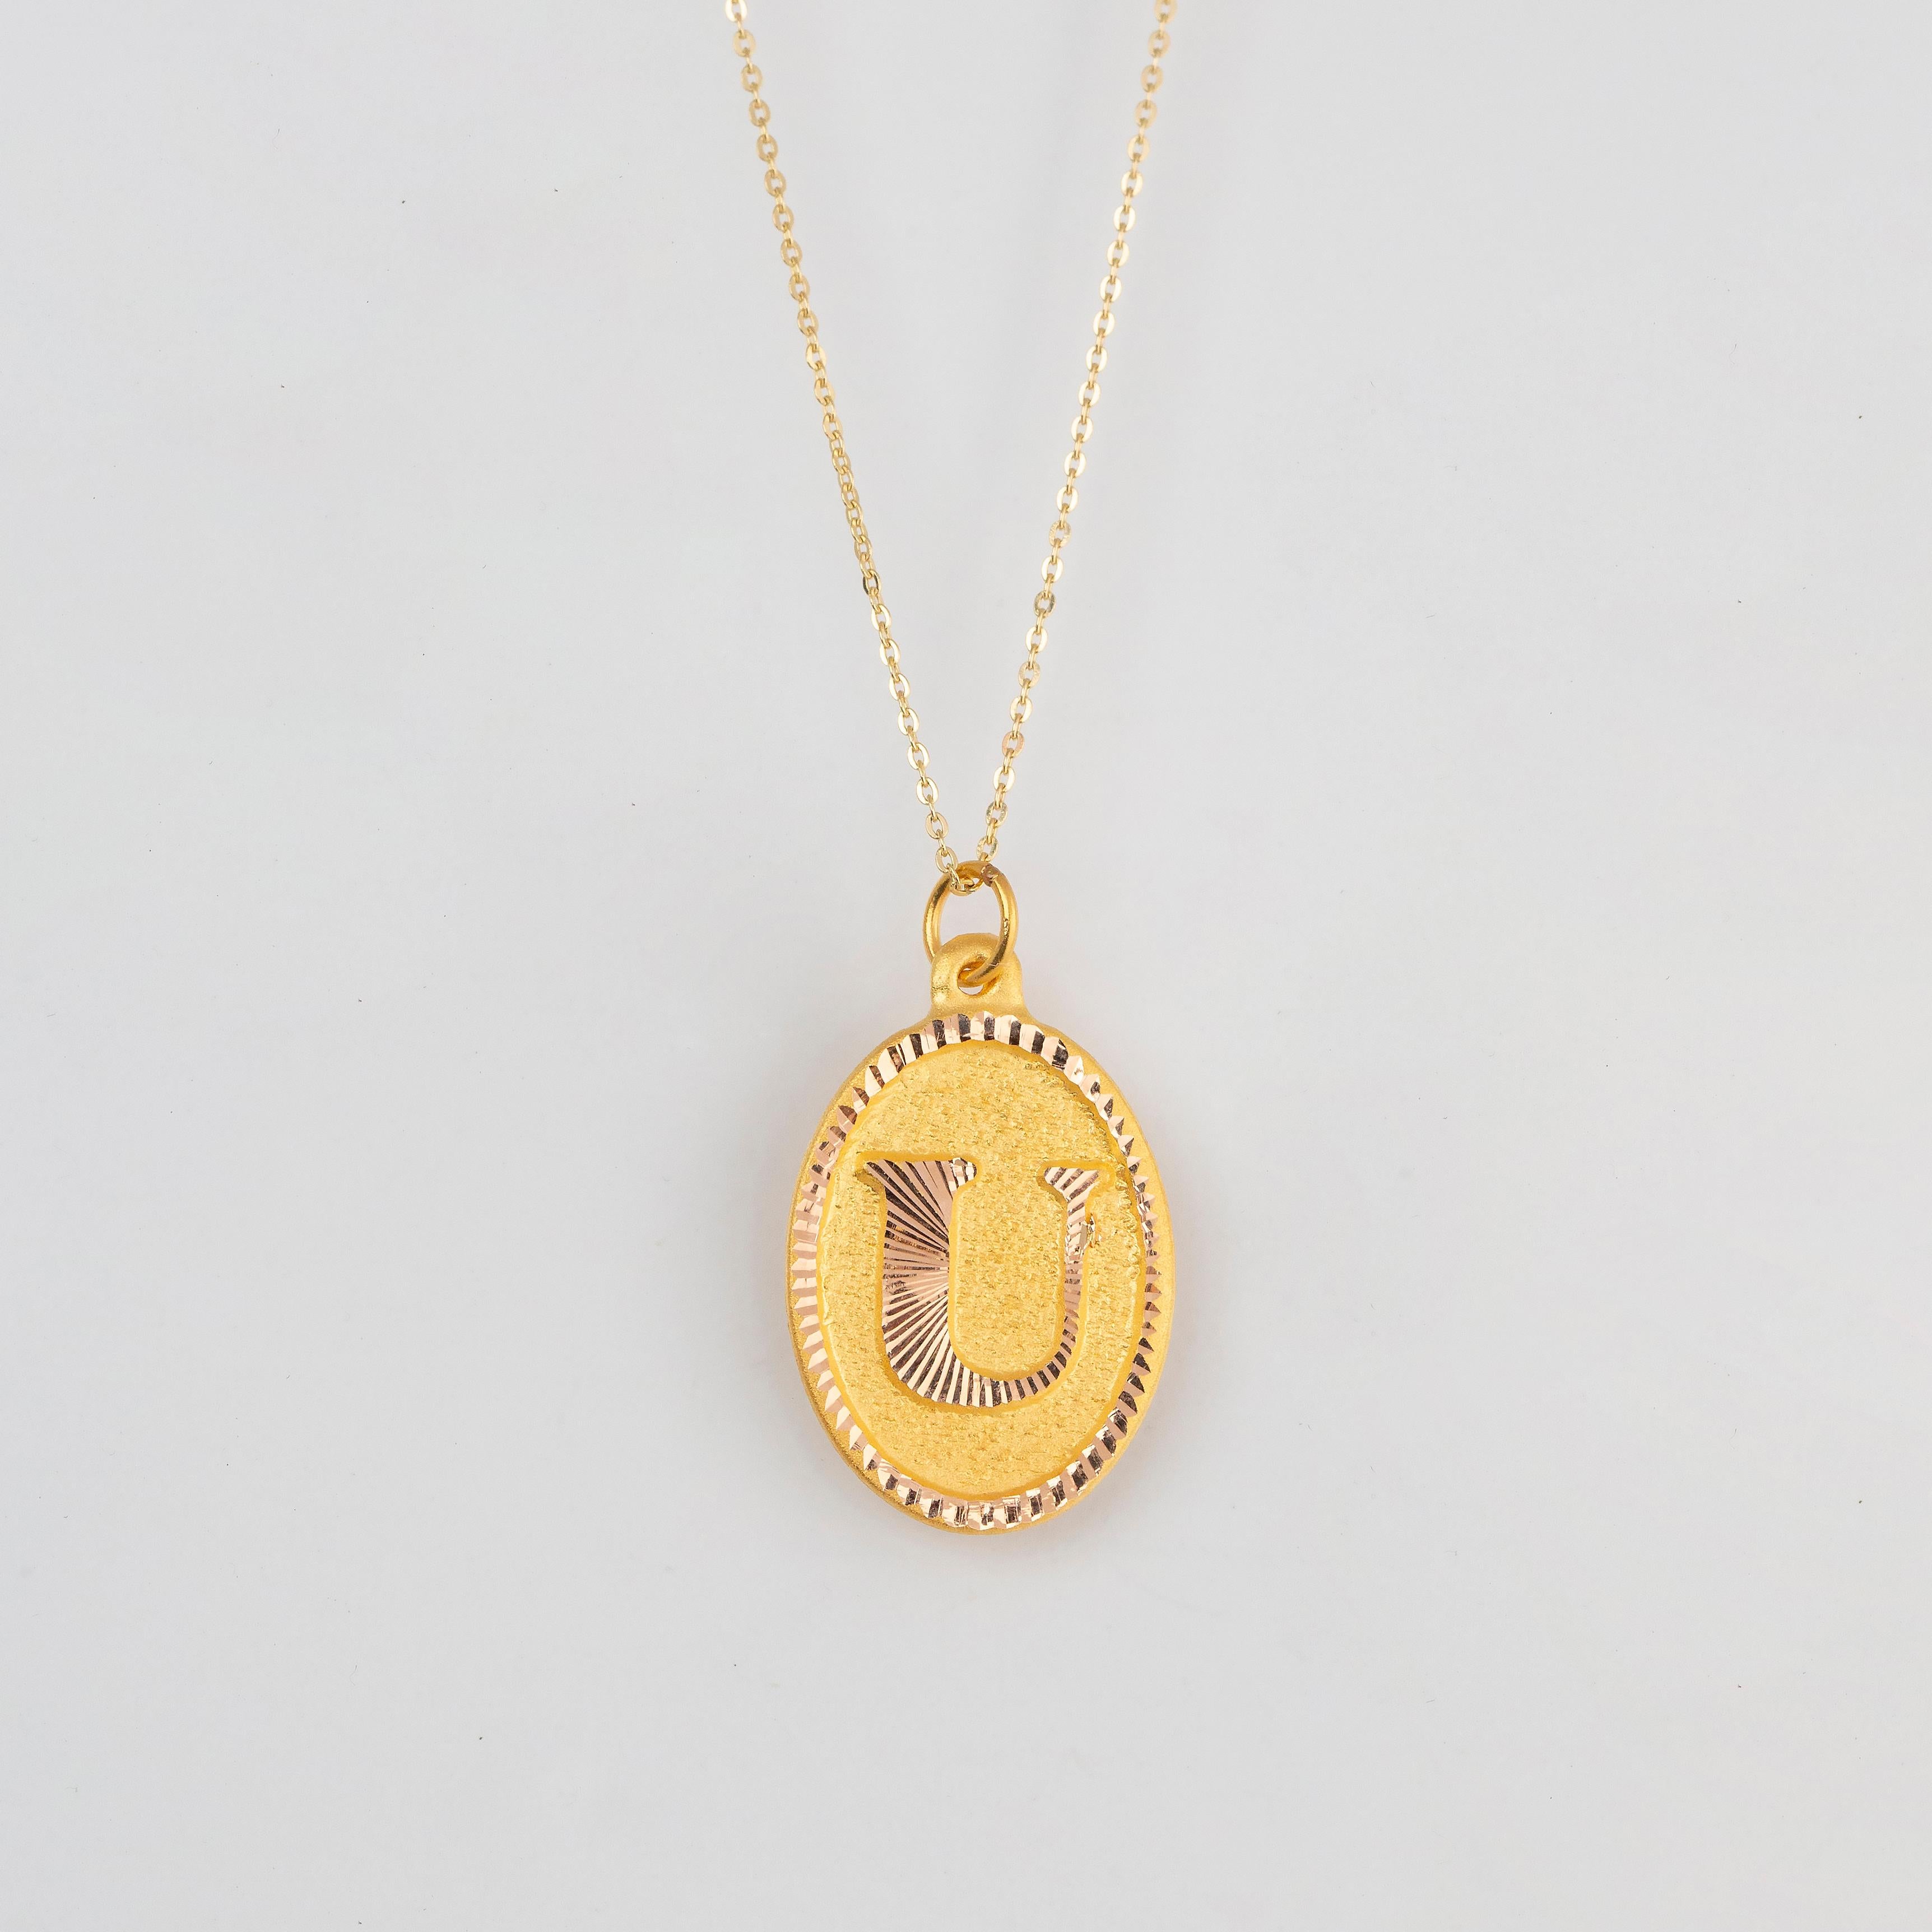 14K Gold Necklaces, Letter Necklace Models, Letter U Gold Necklace-Gift Necklace Models, Daily Necklaces, Letter Jewelry

It's a manual labor product. 'Handmade'. Fashionable product.

This necklace was made with quality materials and excellent